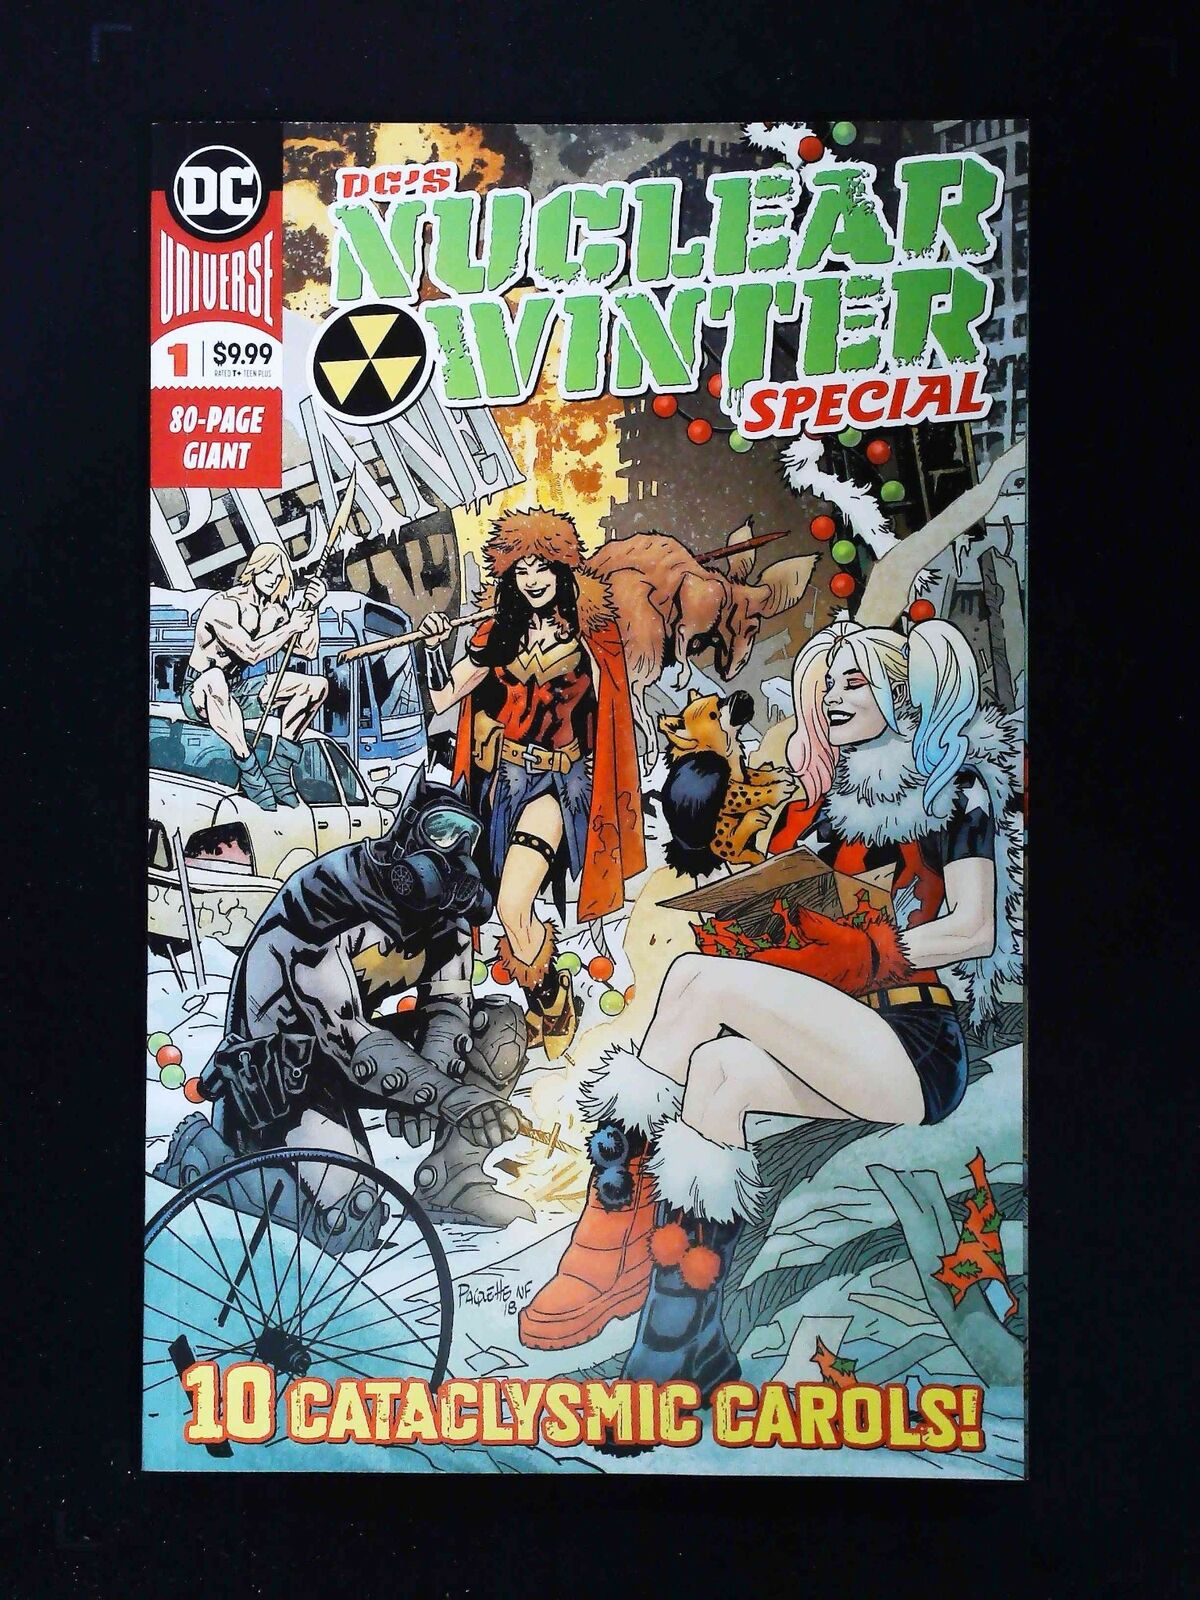 DC NUCLEAR WINTER SPECIAL #1  DC COMICS 2019 NM+